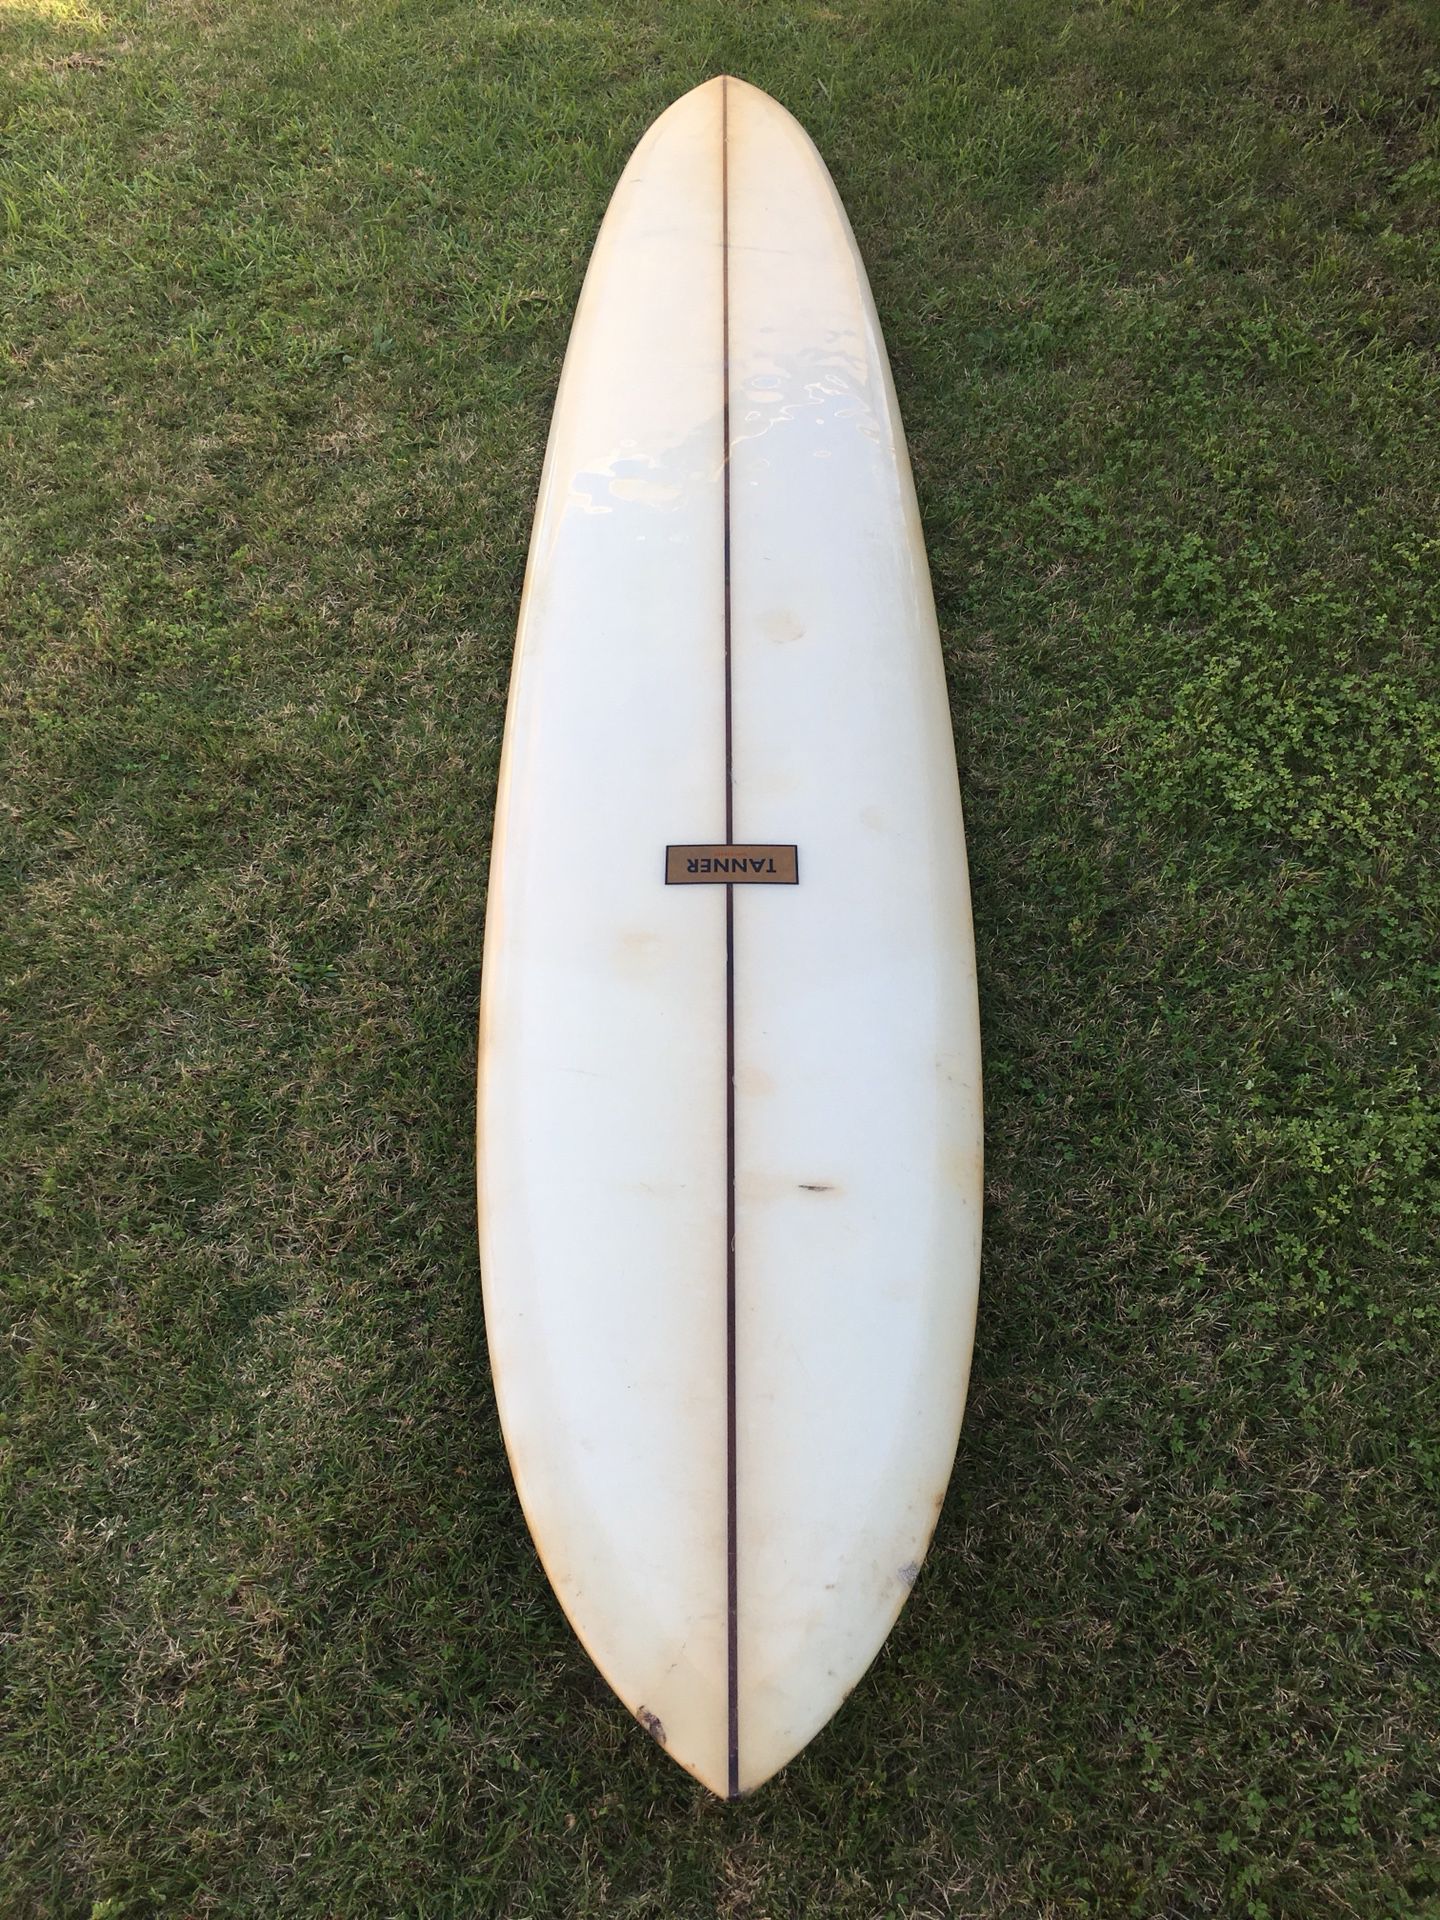 Tanner Surfboards, hand shaped, 10’4 Glider